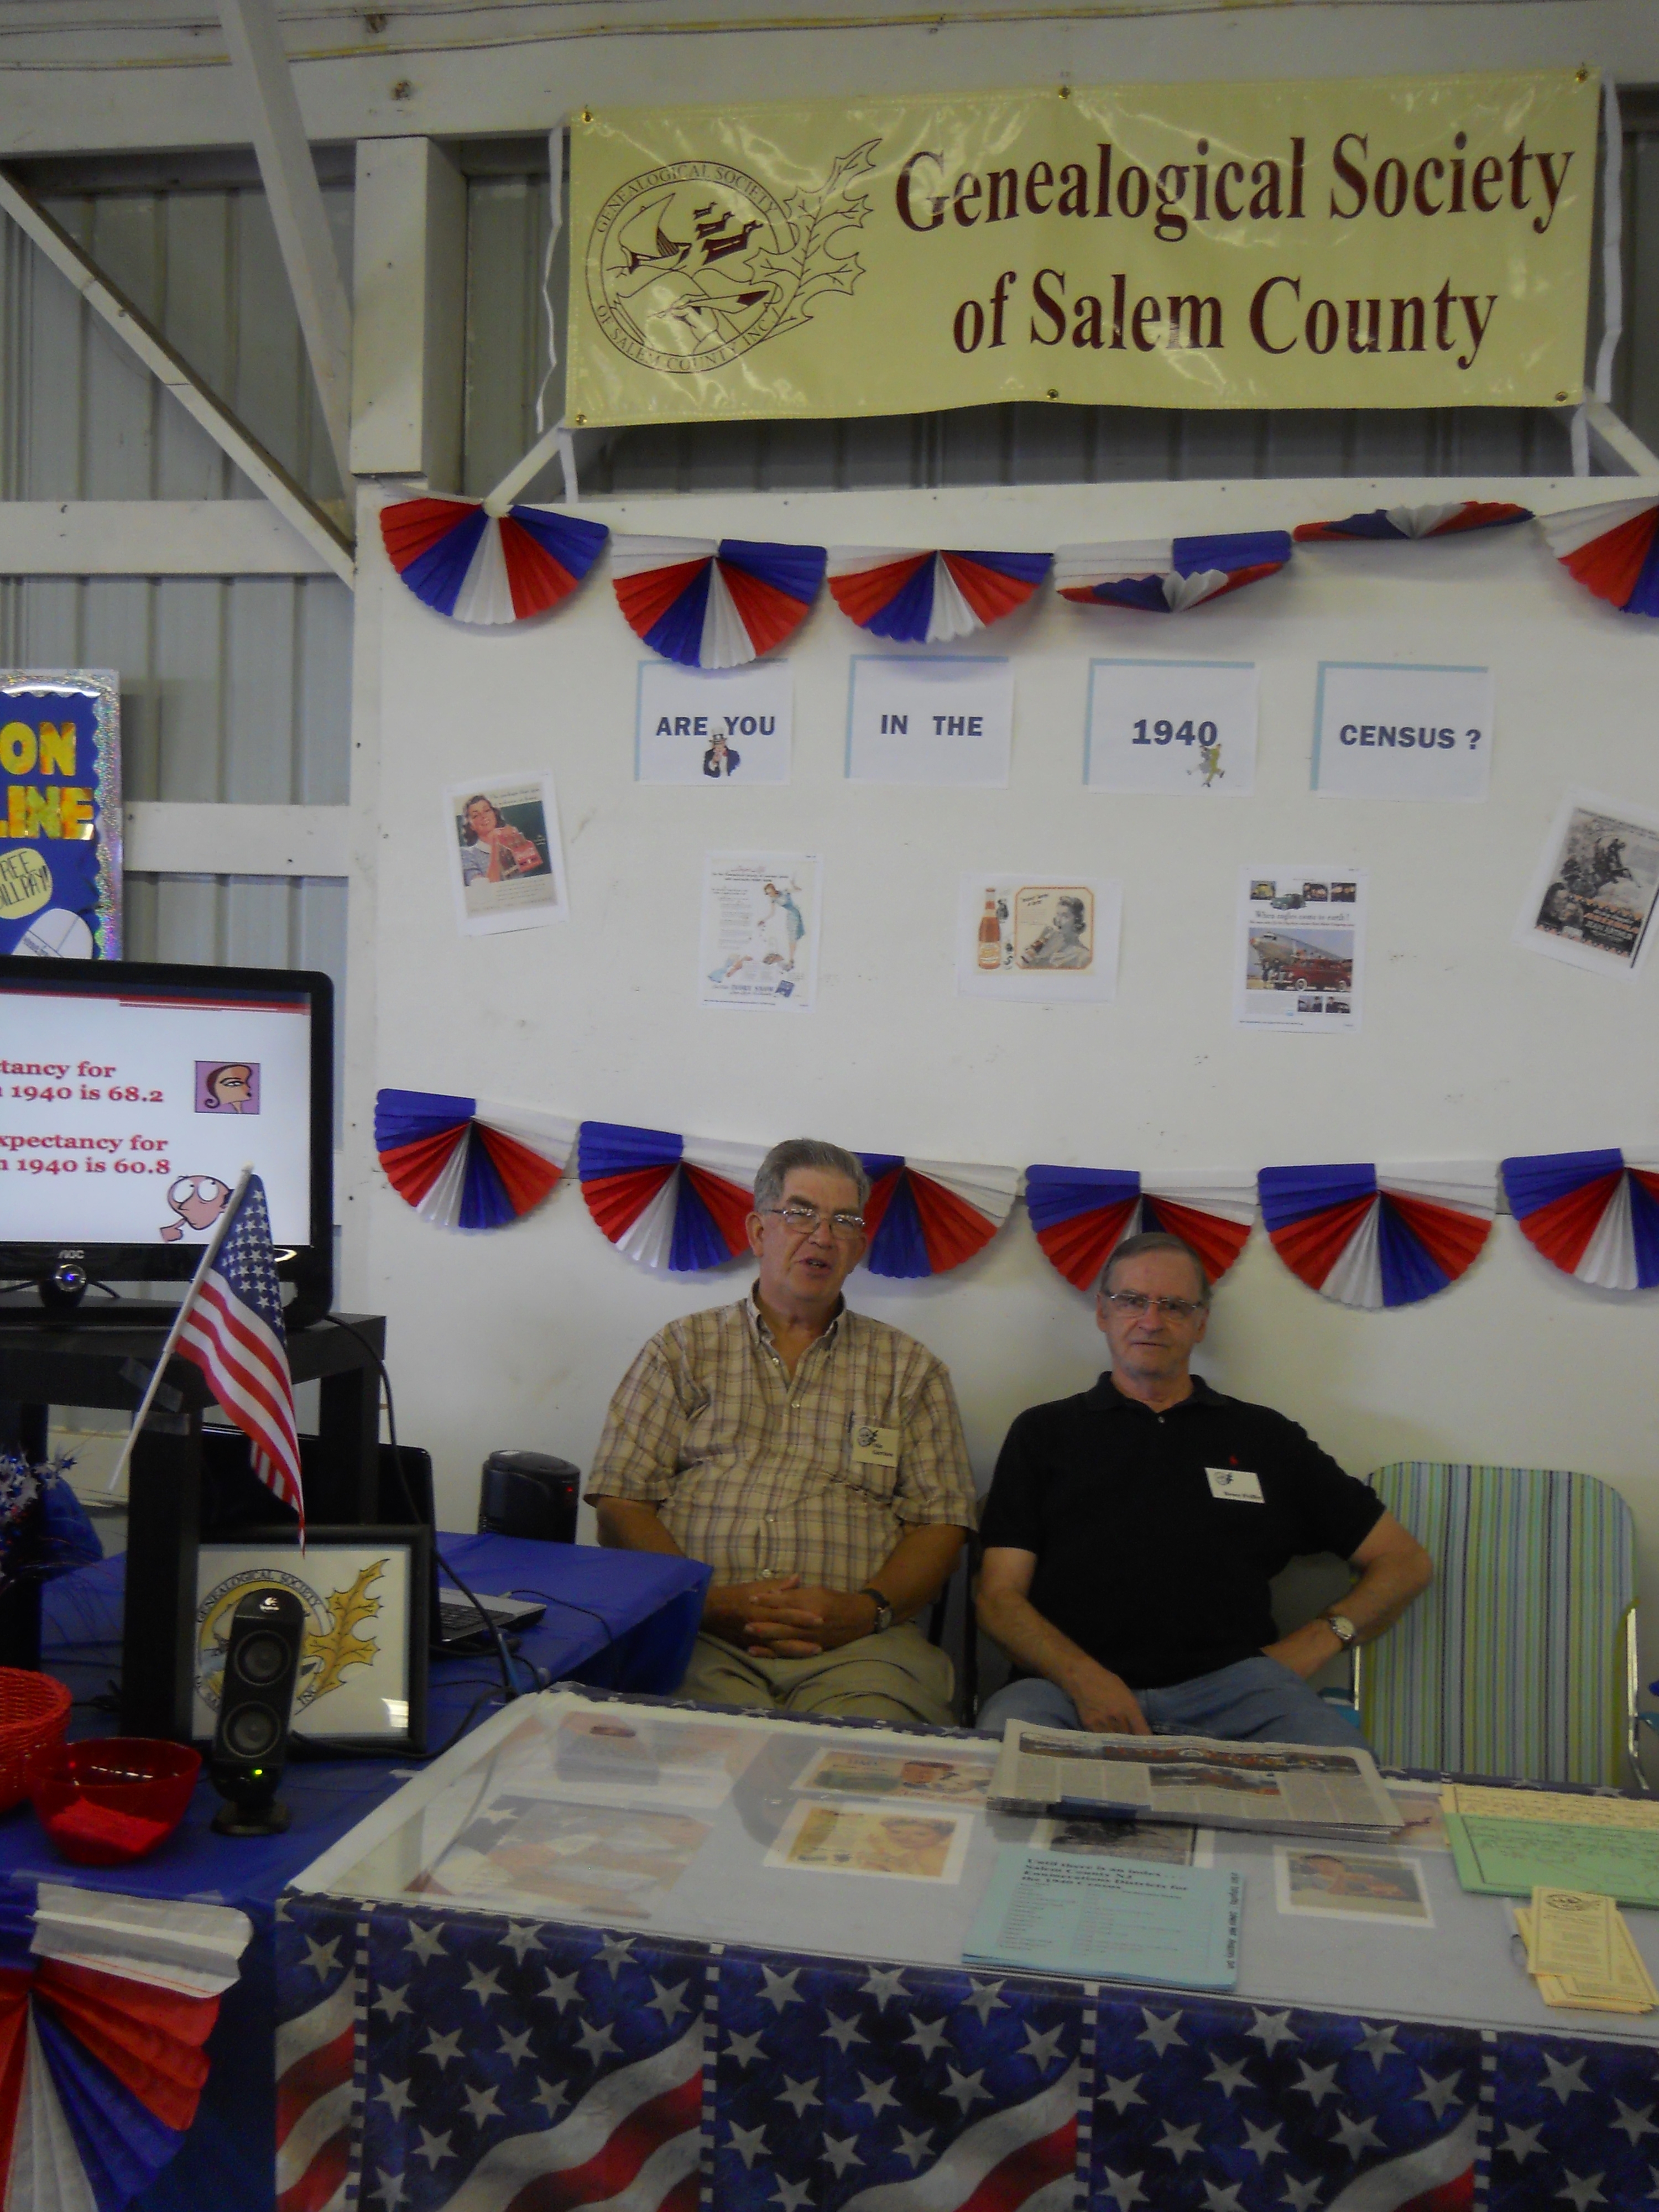 Two members pose at the Genealogical Society's 1940s Census themed booth